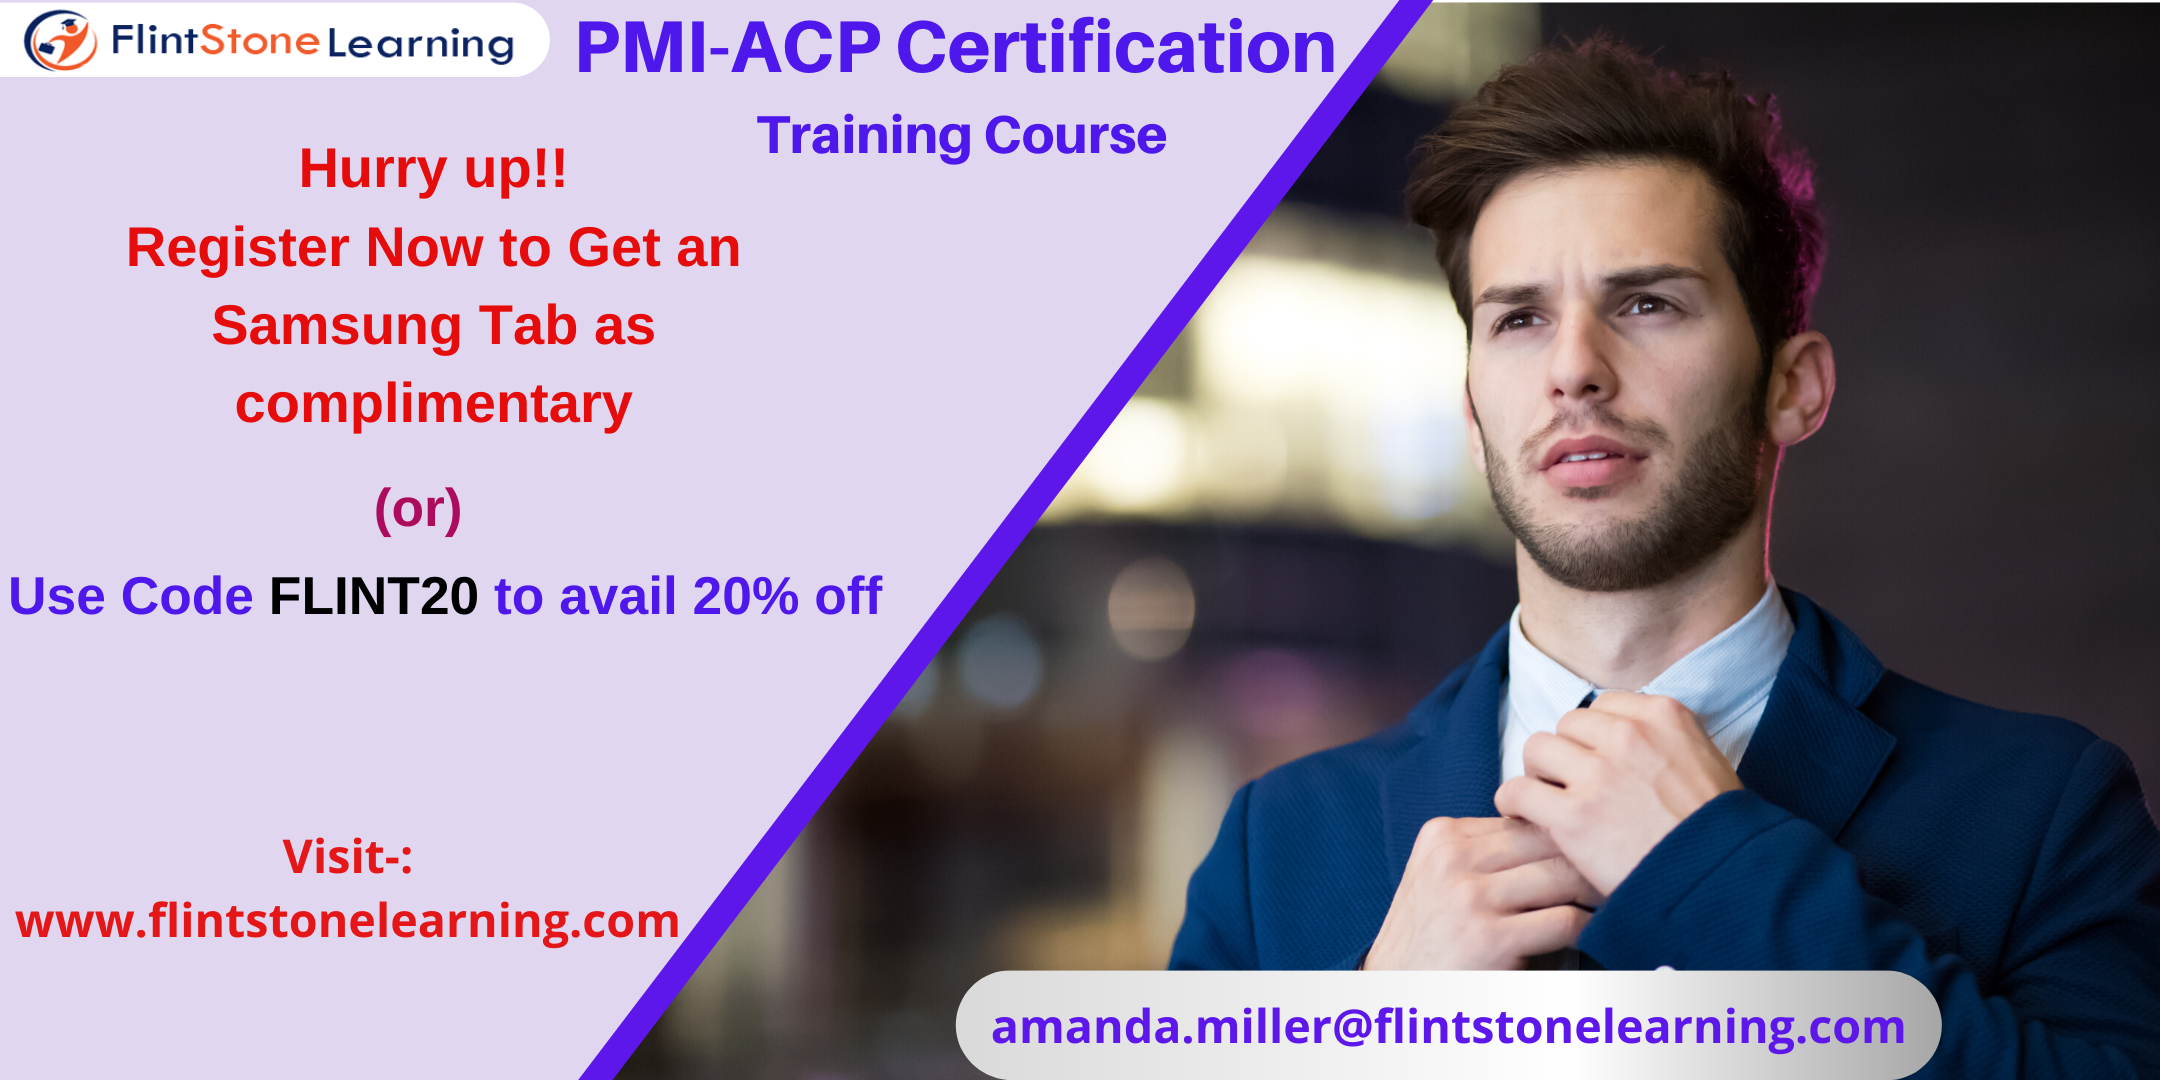 PMI-ACP Certification Training Course in Downey, CA